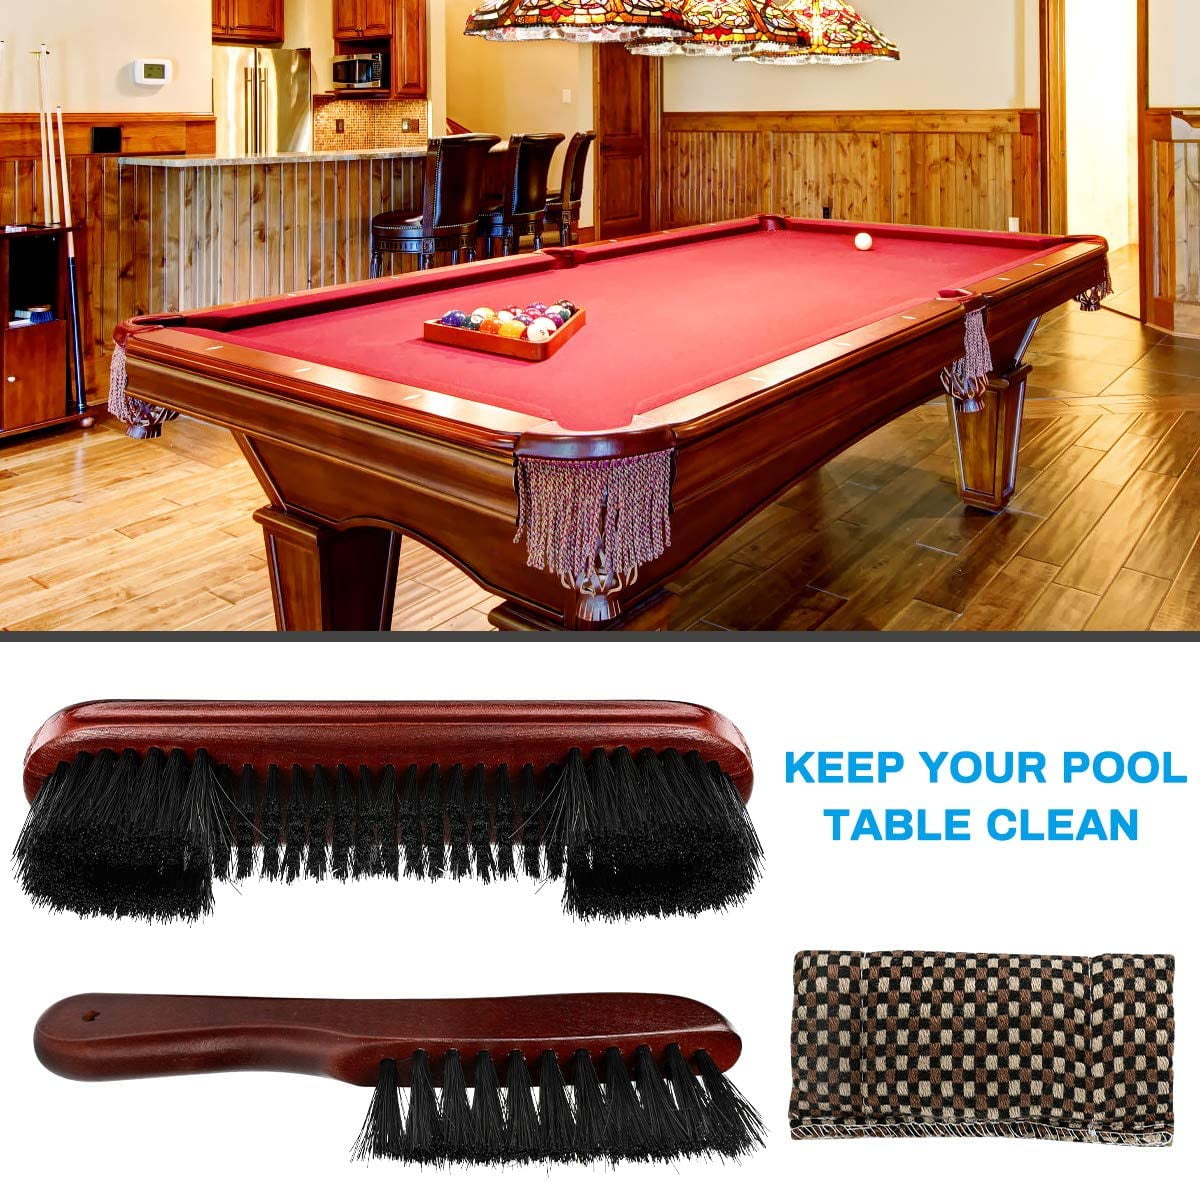 1X Wood Brush Cleaner Pool Table Cleanning Tool Billiard Accessories OQF 